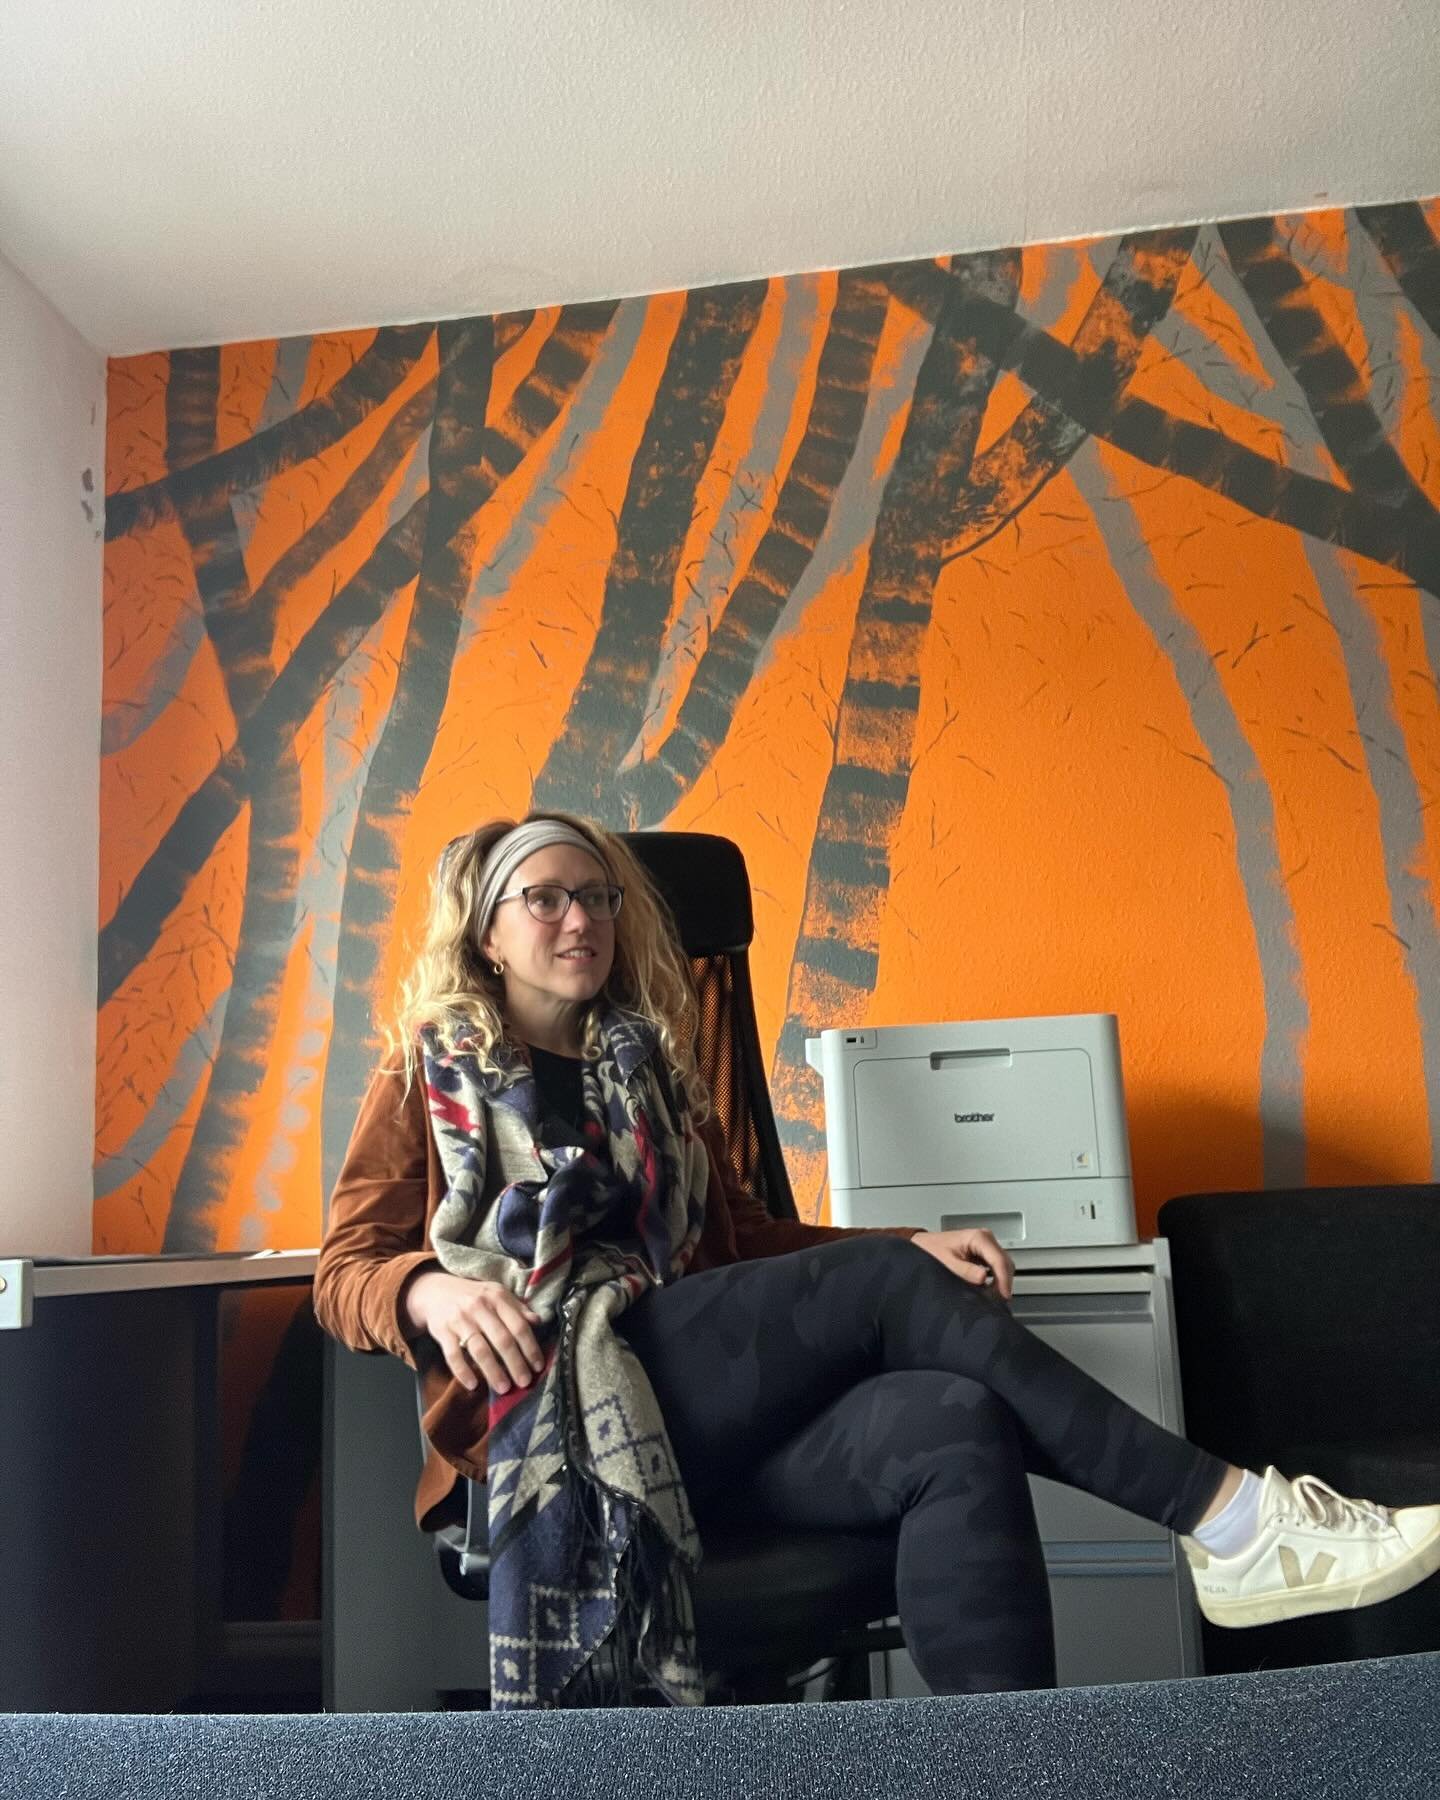 I&rsquo;m all about creating joyful places. The positive impact of nature is well known and here I&rsquo;ve brought the beautiful silver birch to the wall.

Now the client has an office that inspires and nourishes. Your environment has such a huge im